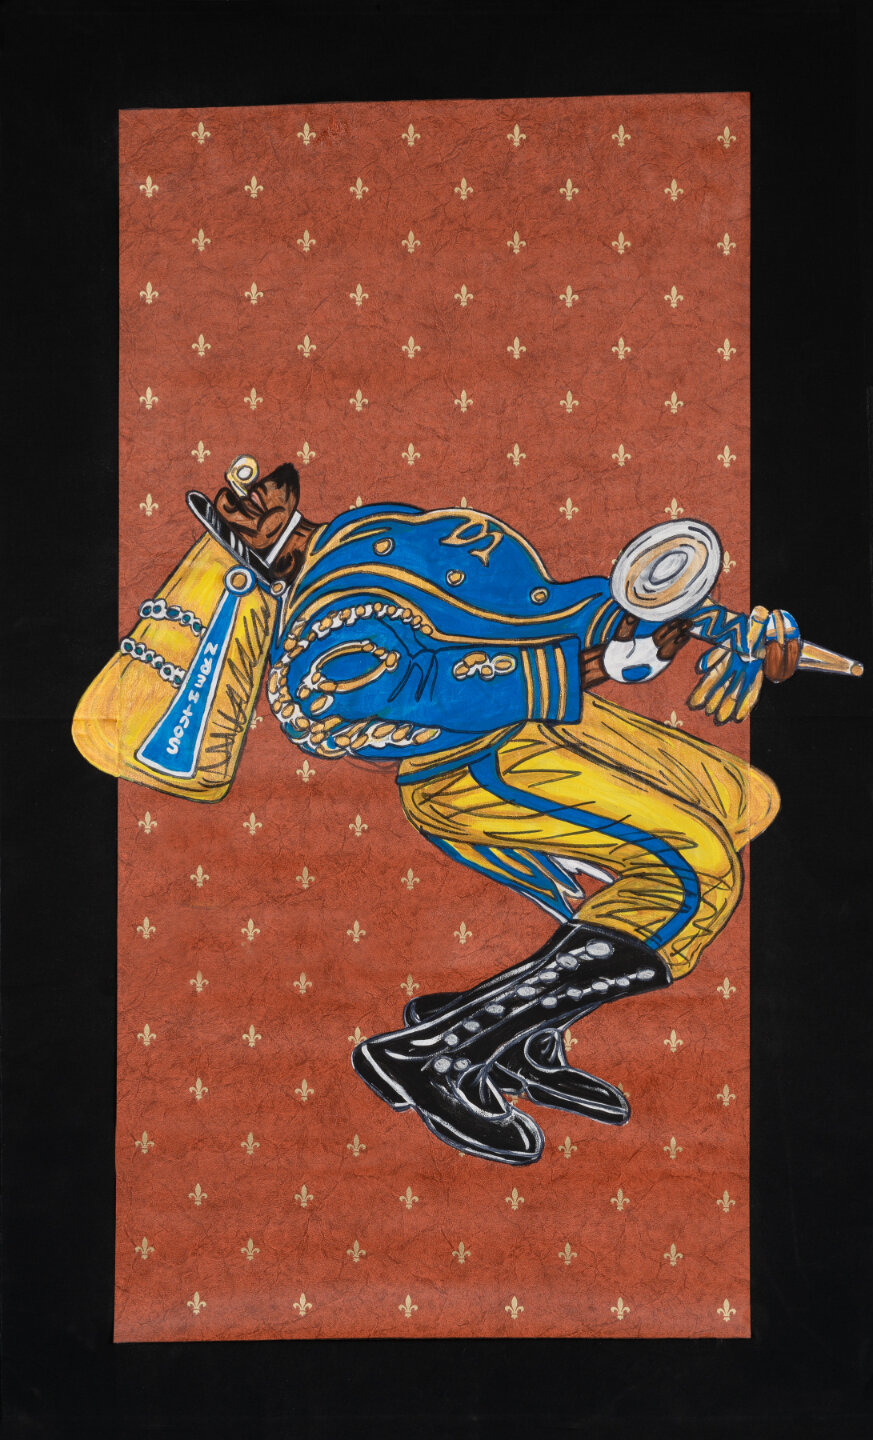  Keith Duncan  Southern University Drum Major 2 , 2020 Acrylic on vinyl mounted to canvas 61 x 37 inches 